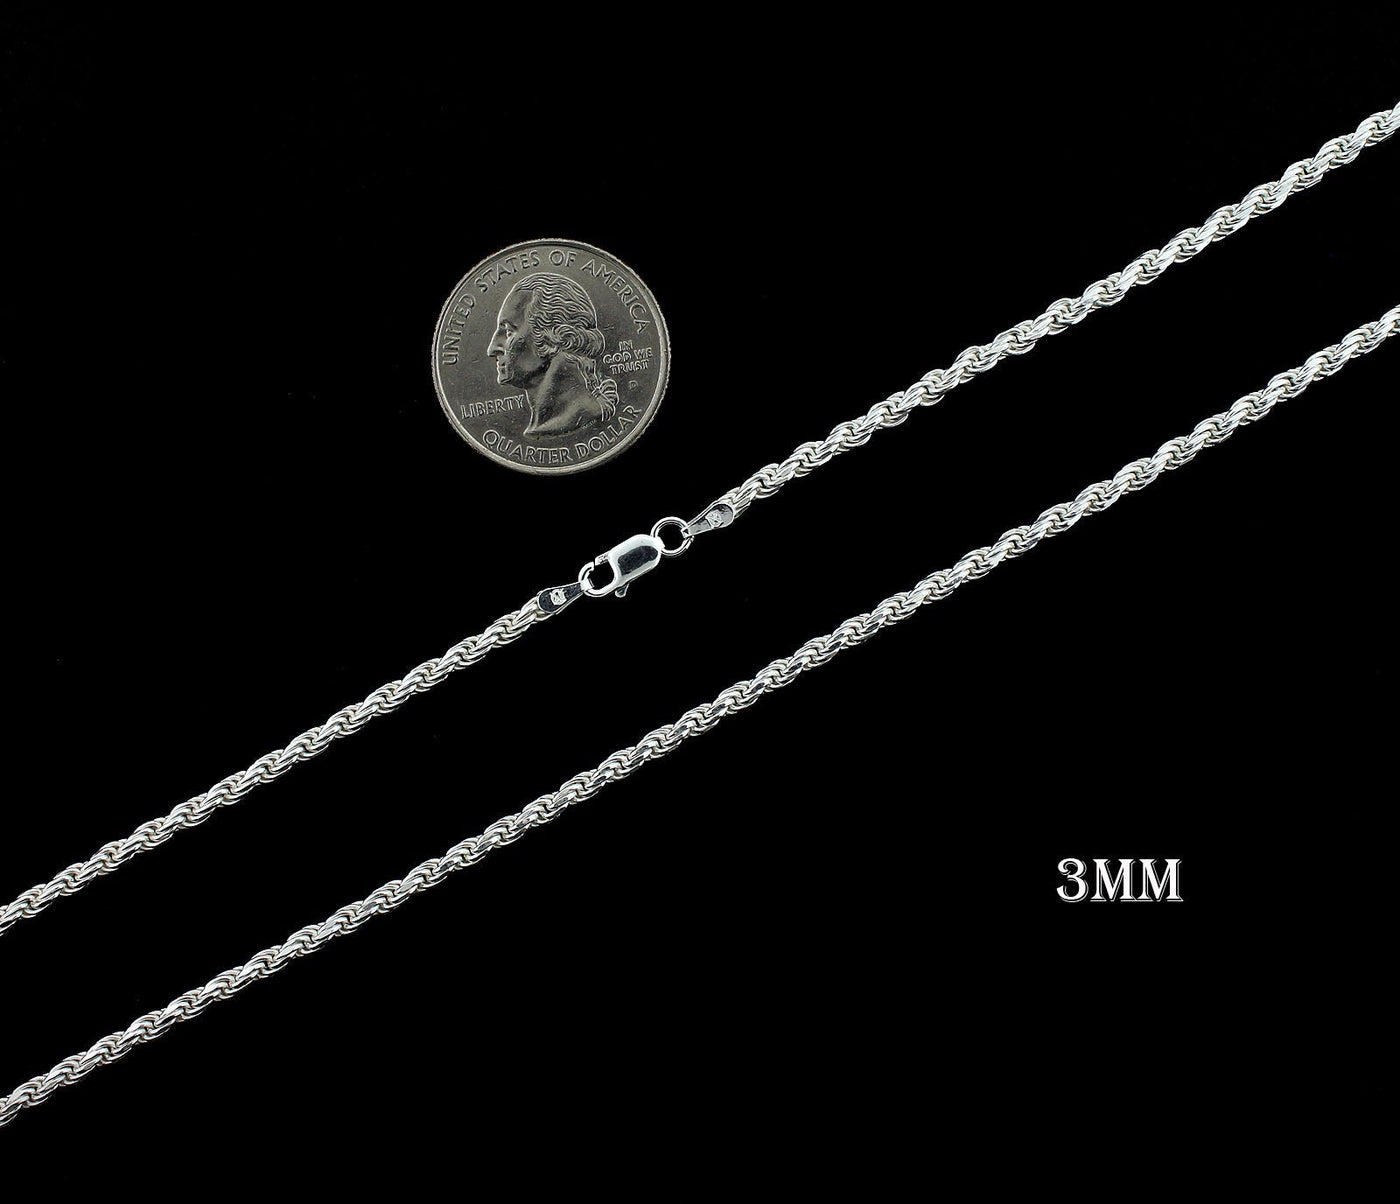 3MM Solid 925 Sterling Silver Diamond-Cut Rope Chain Necklace or Bracelet ITALY